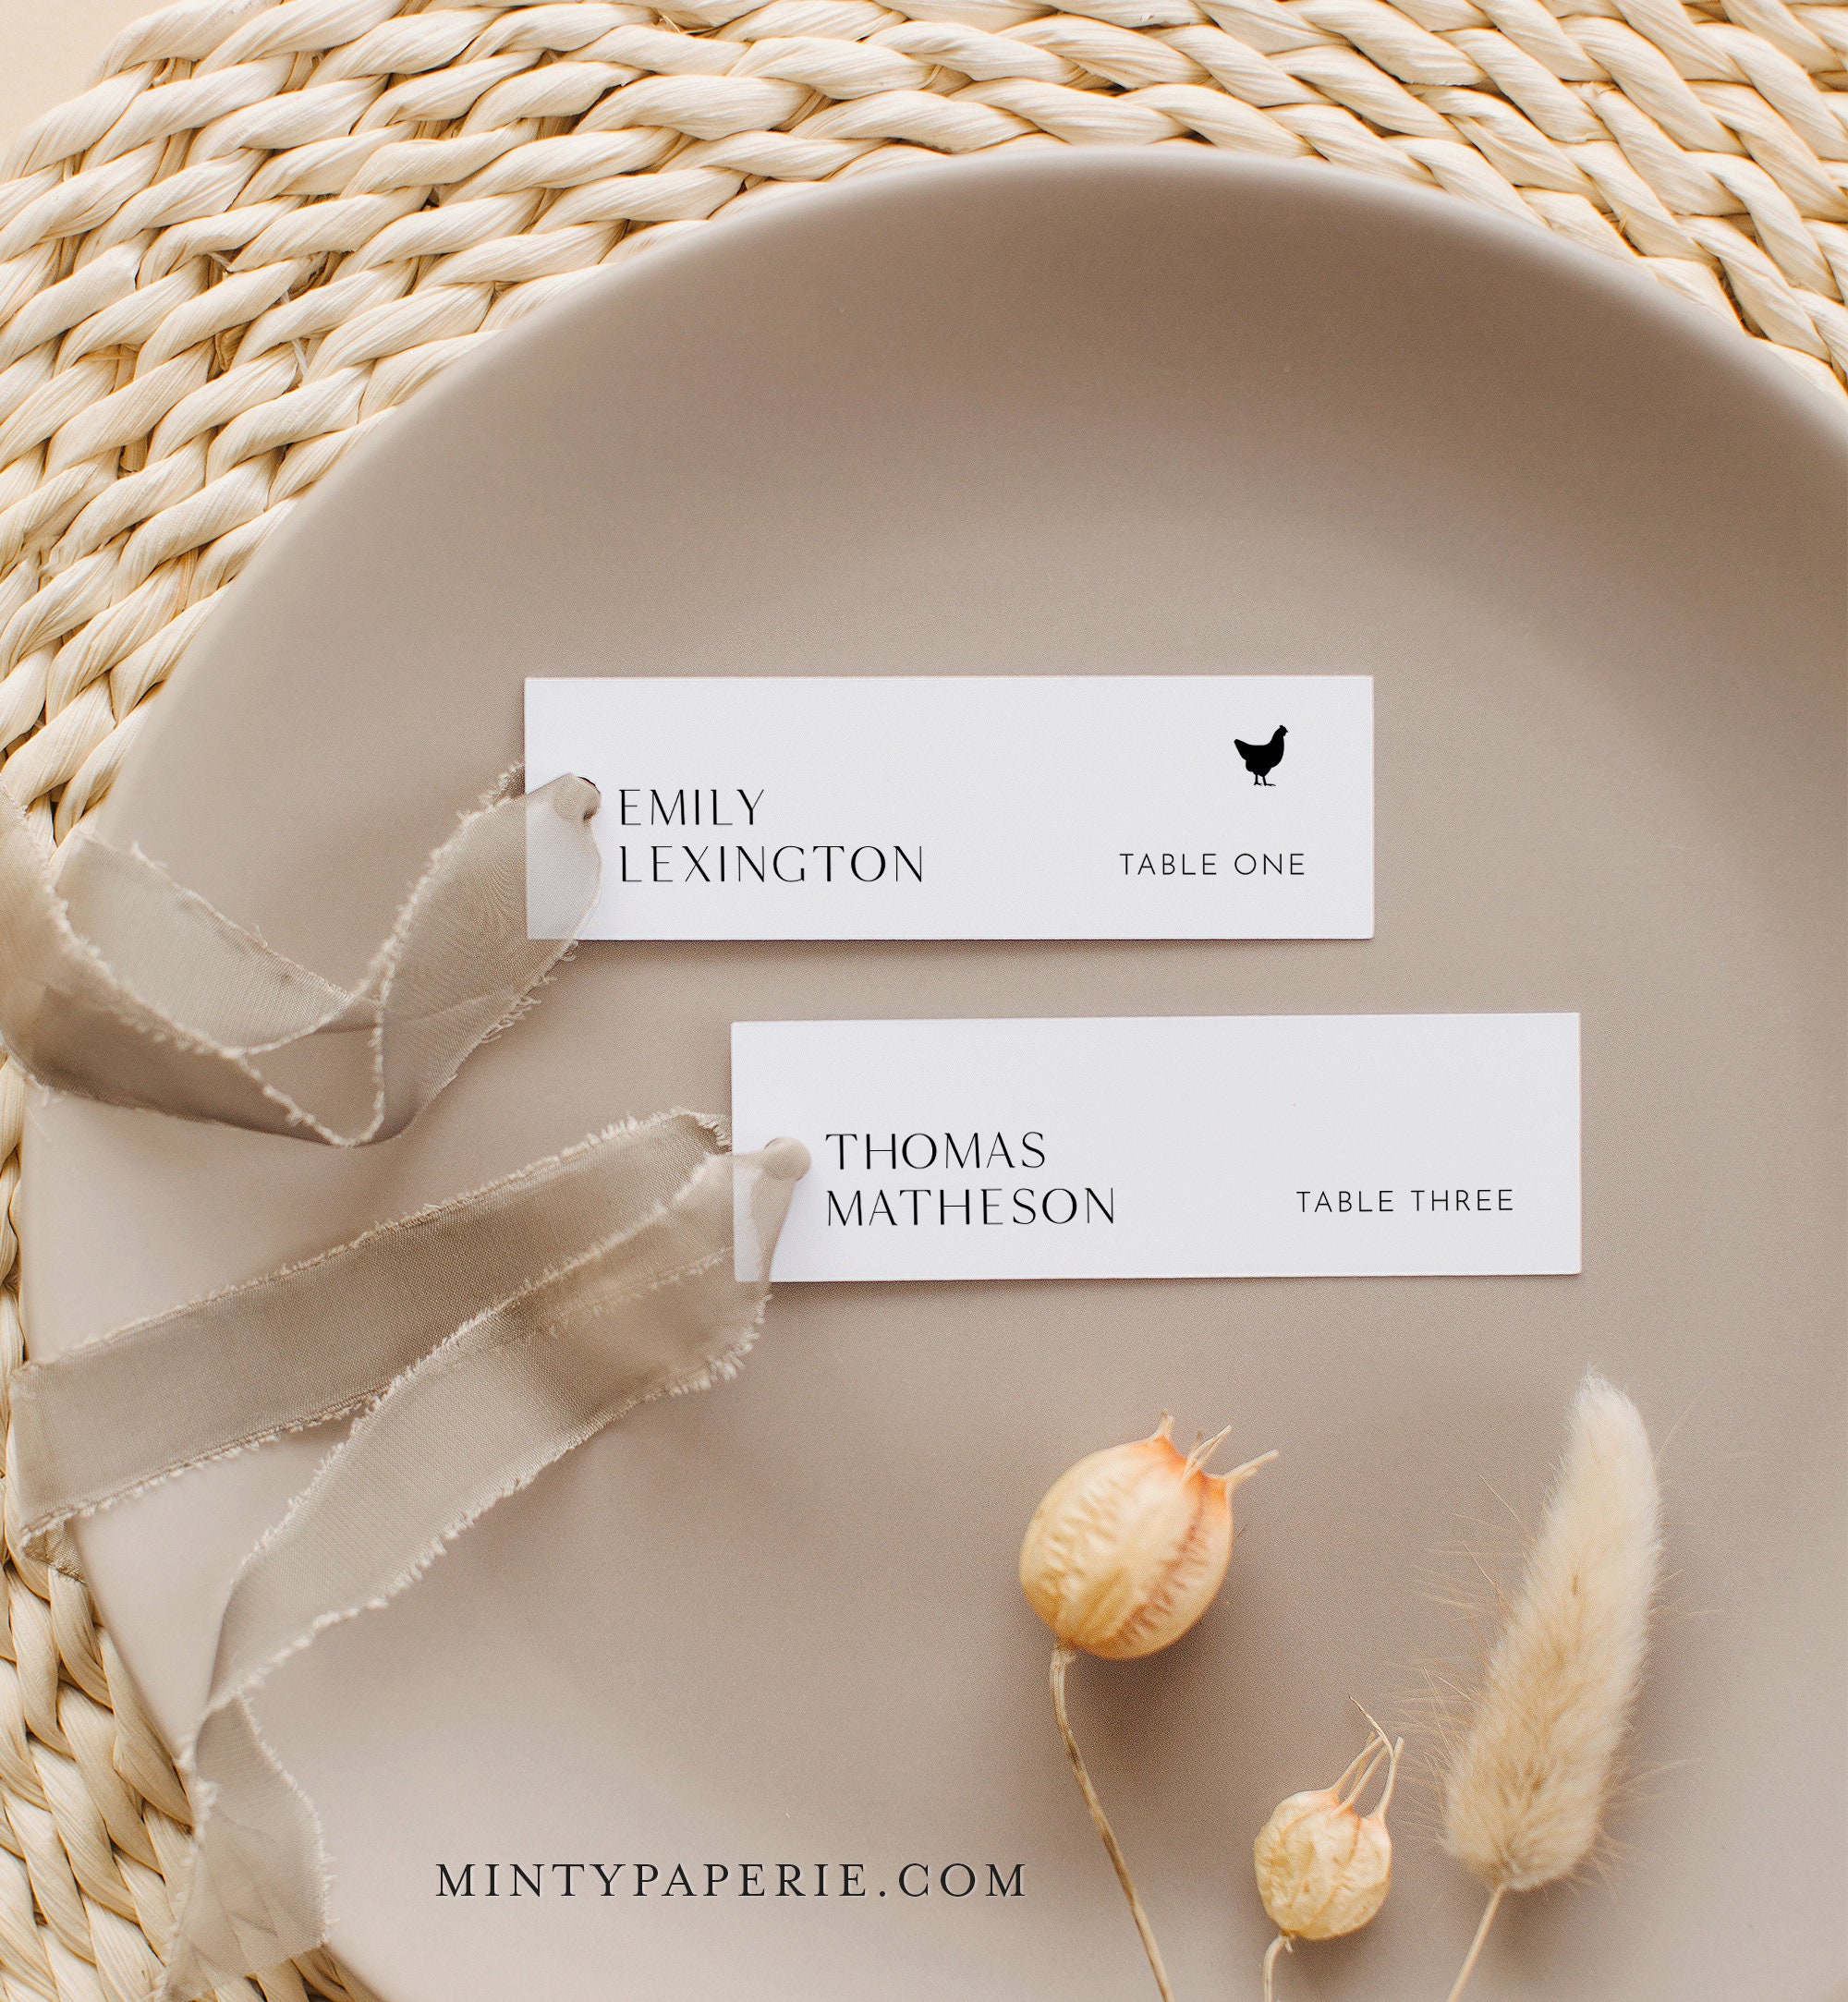 Minimalist Place Card Template, Modern Place Card, Wedding Place Cards  Printable, Table Name Cards, Editable Escort Cards, Any Occasion 